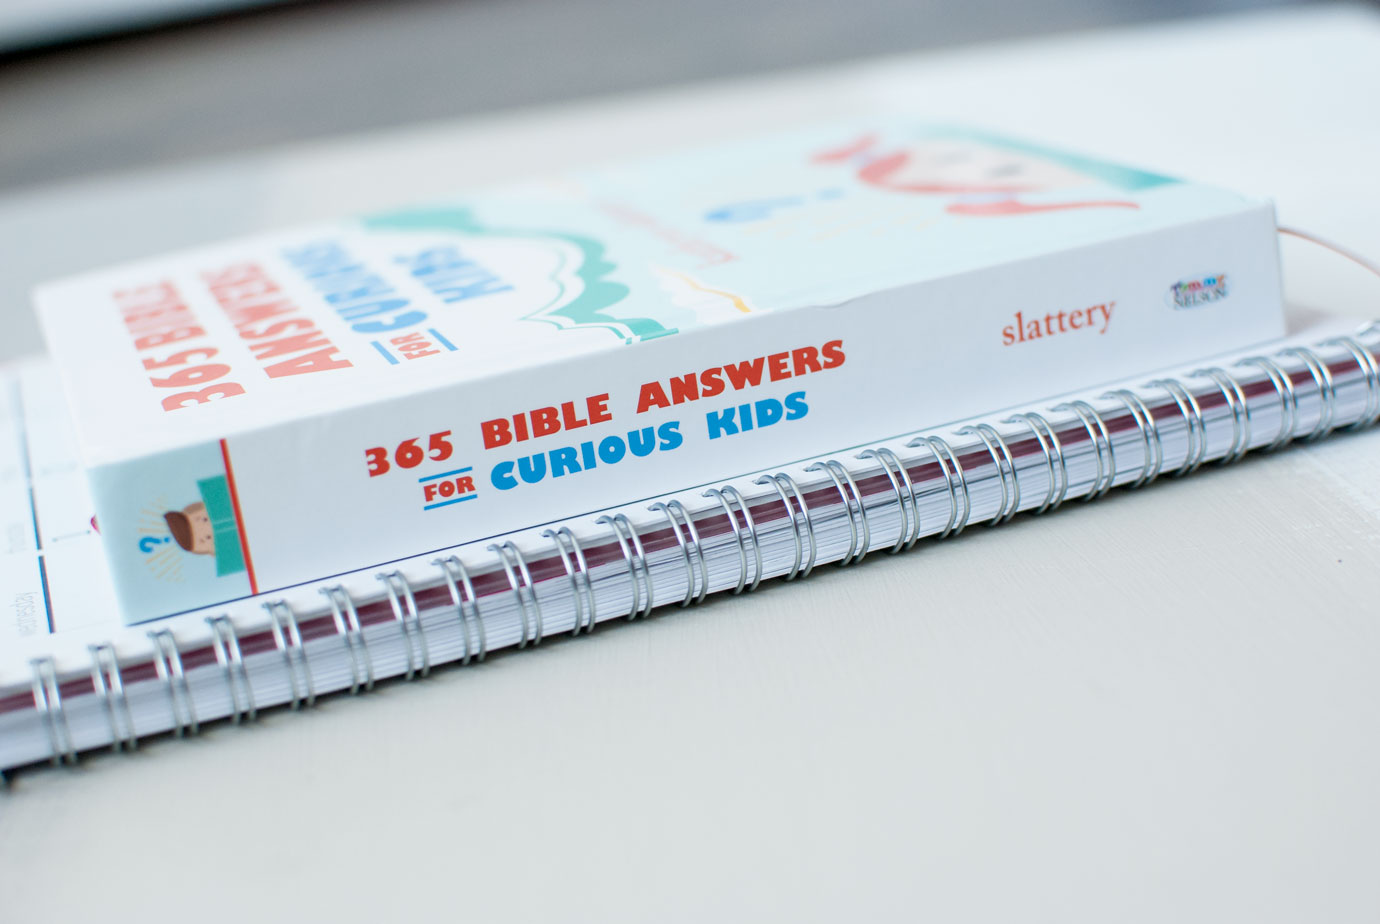 365 Bible Answers For Curious Kids Devotional Book Spine View